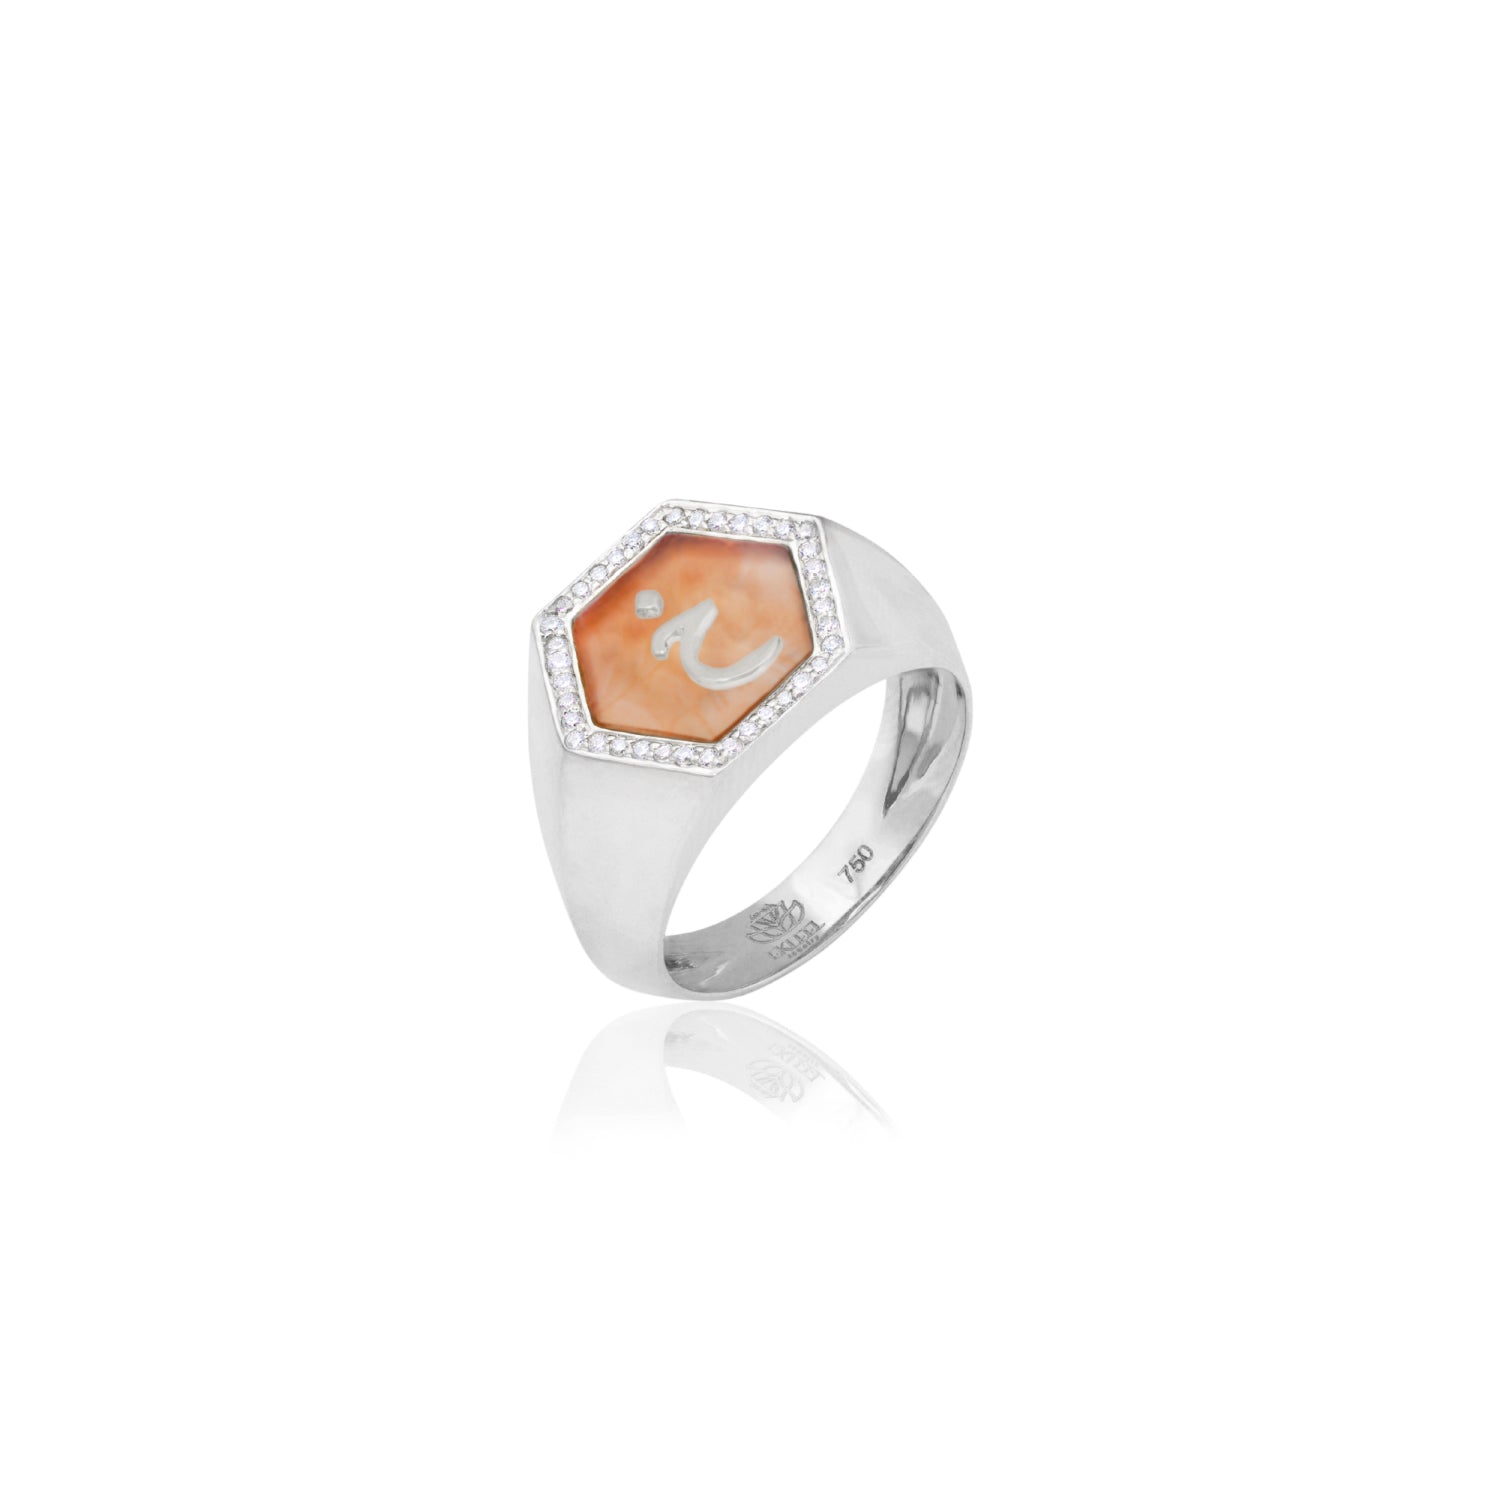 Qamoos 2.0 Letter خ Carnelian and Diamond Signet Ring in White Gold